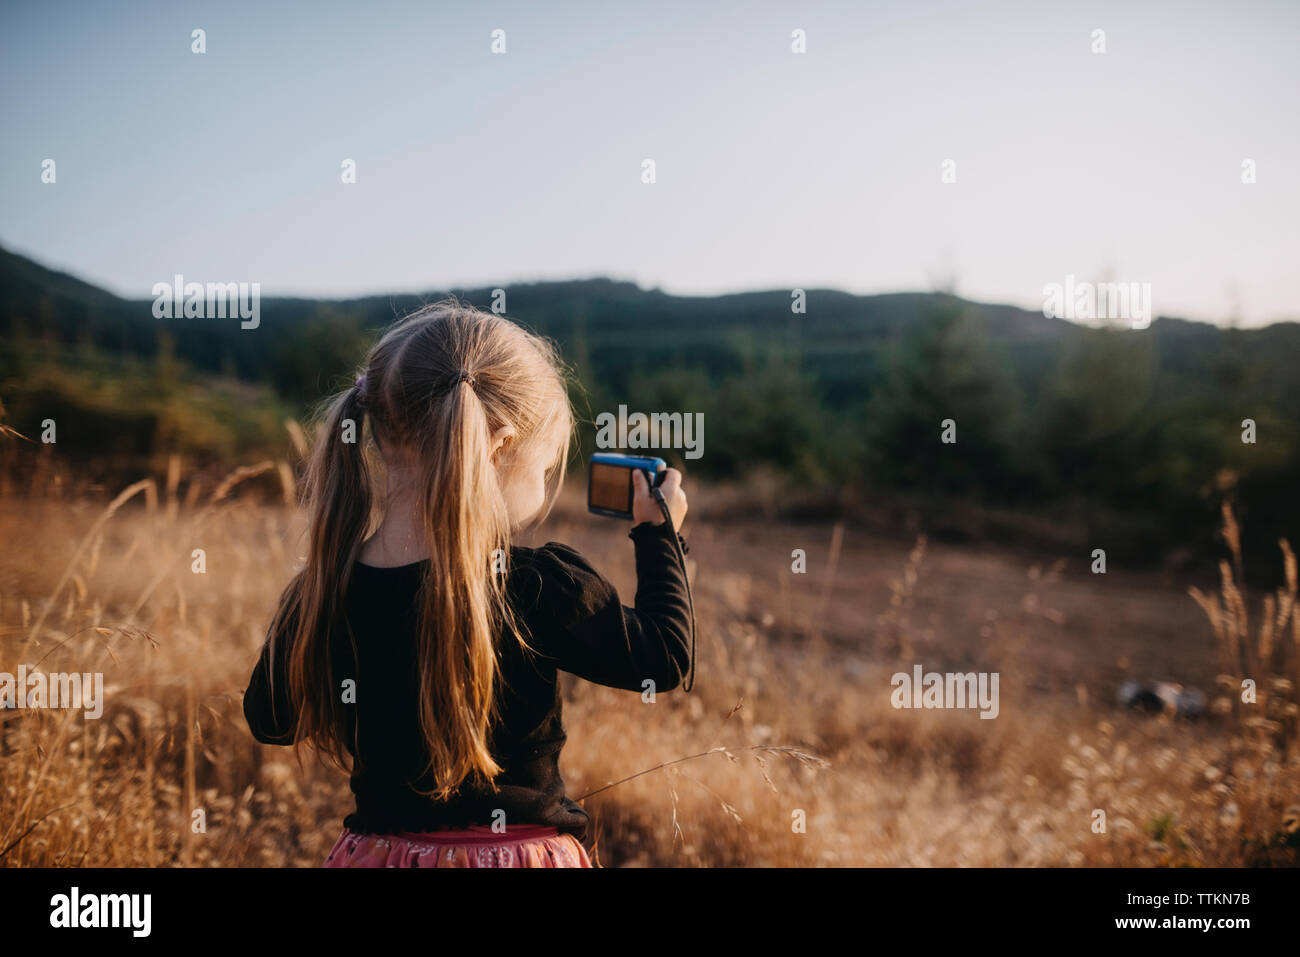 Girl with pigtails photographing while standing on field Stock Photo